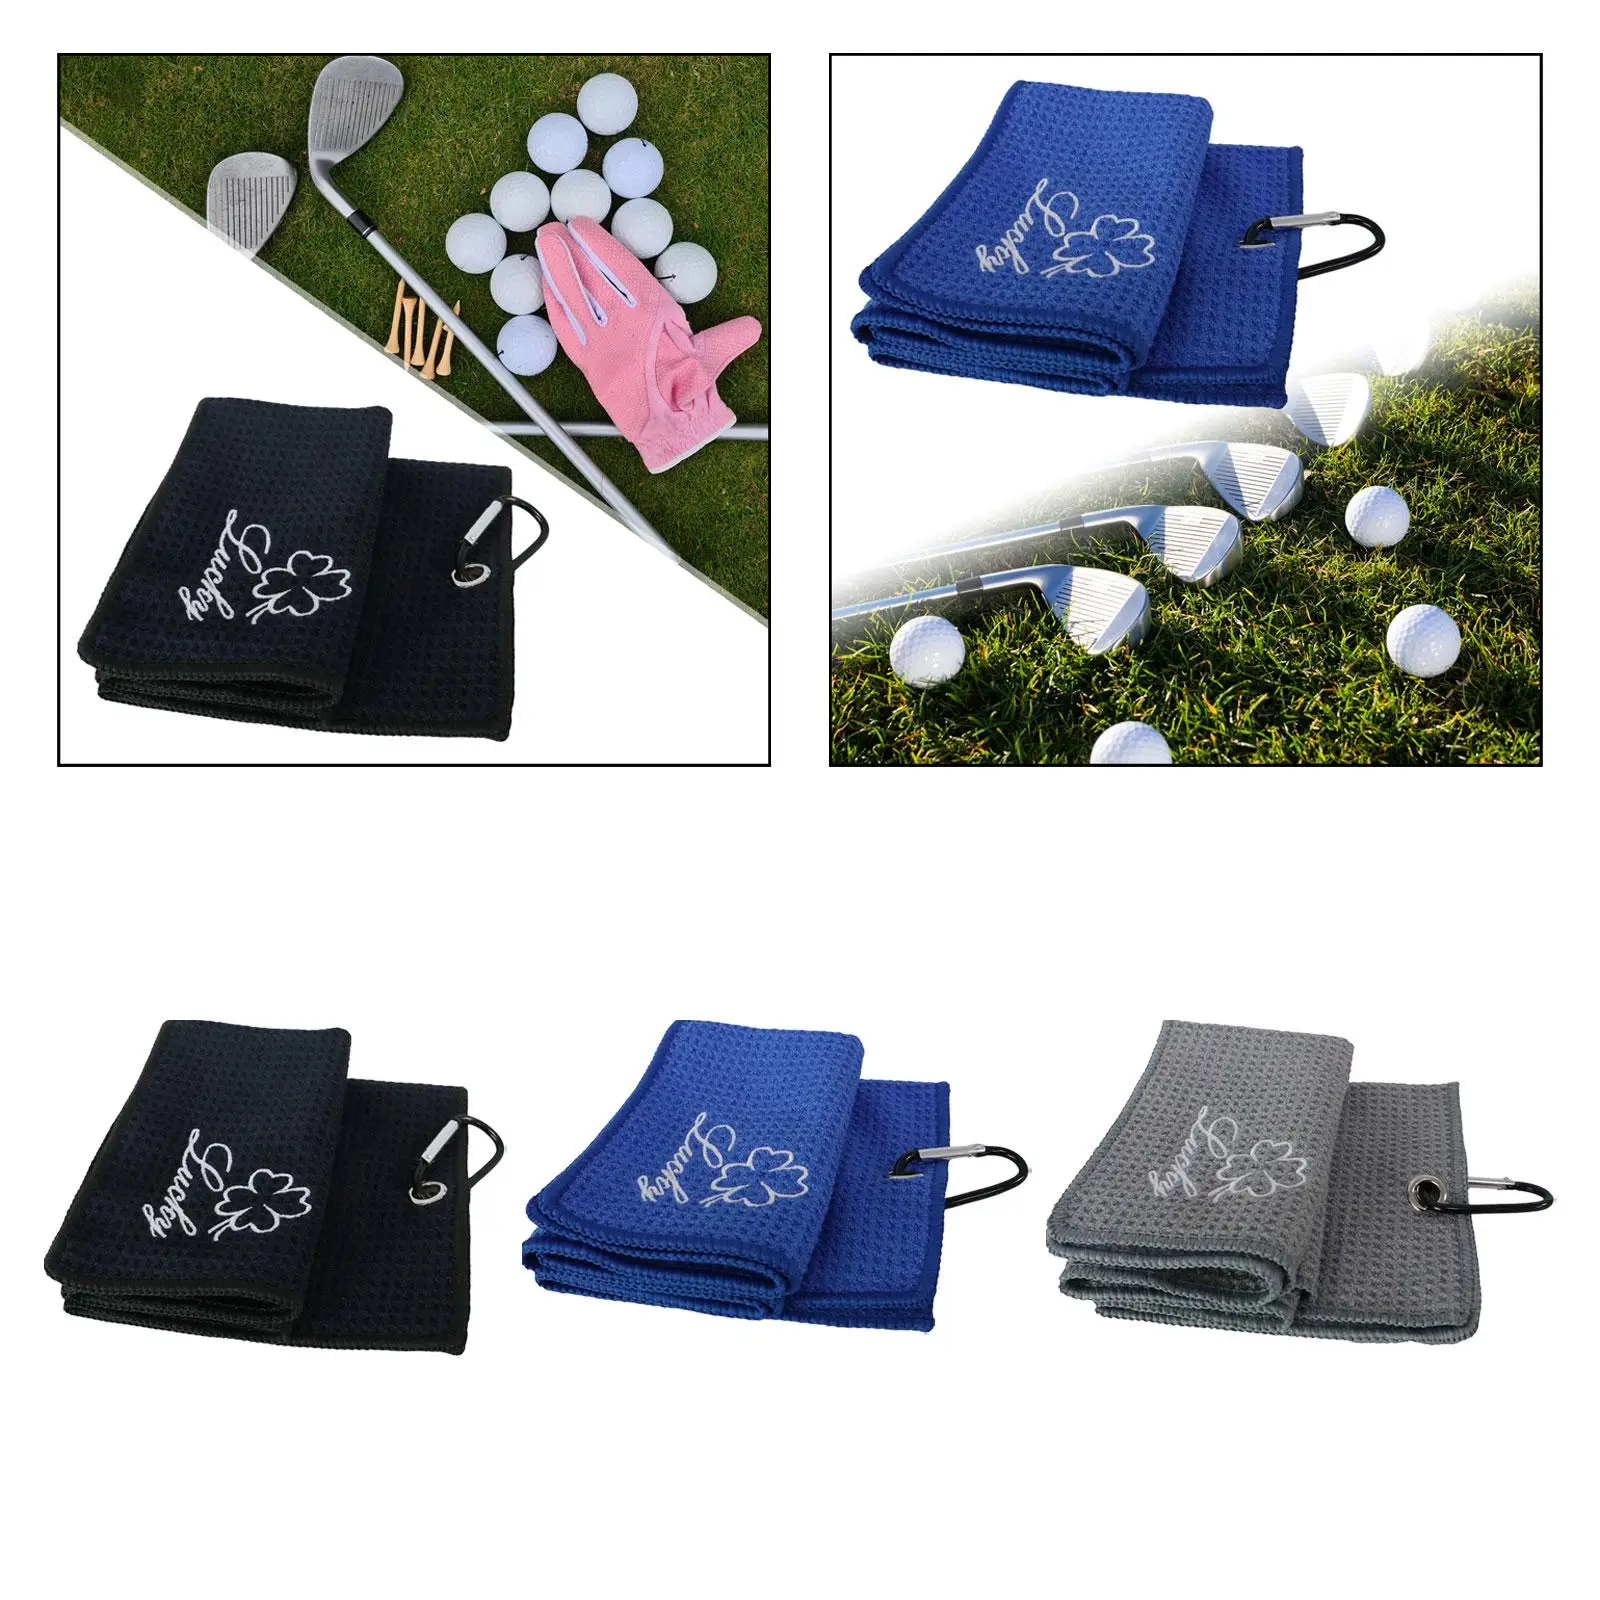 Golf Cleaning Towel Golf Towel for Golf Bags for Practice Golf Tees Balls